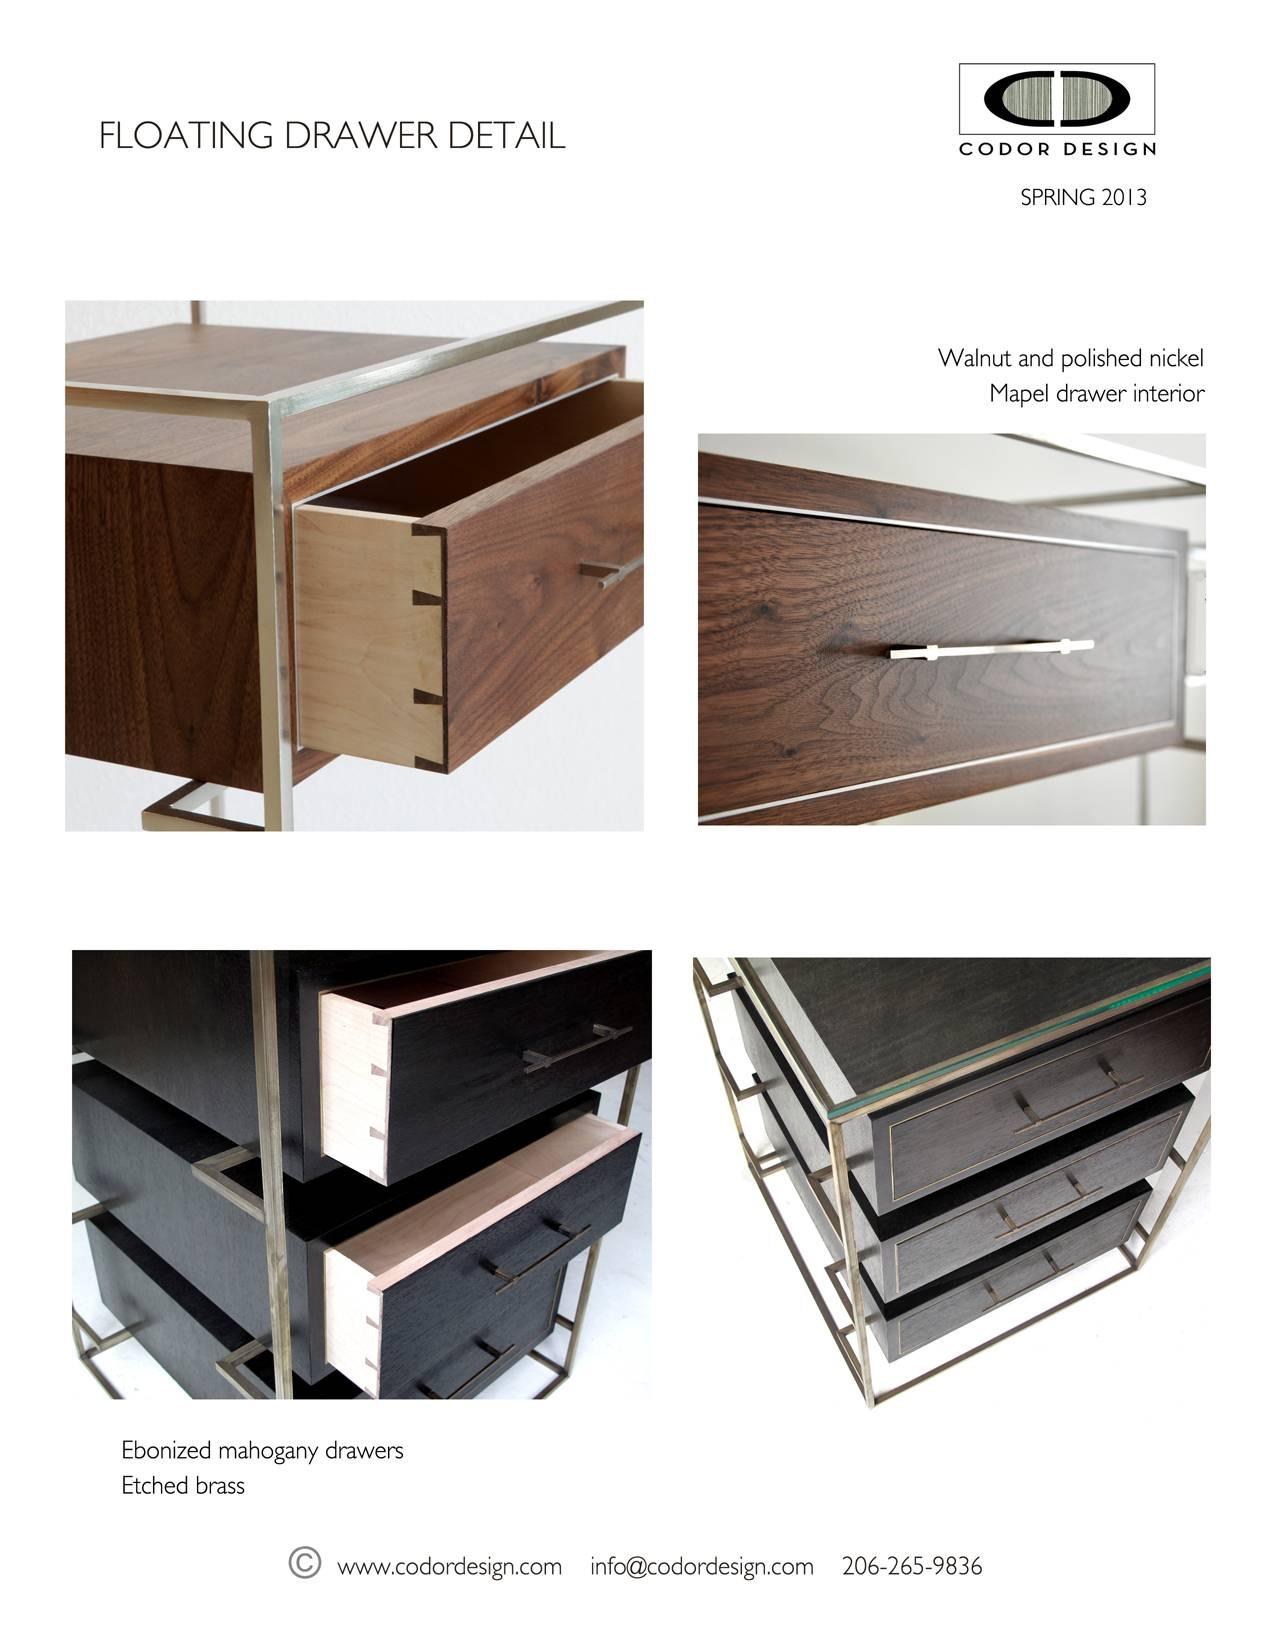 Beautifully constructed drawers float in this uniquely exposed frame. Deconstructing the Classic dresser allows the floating drawer dresser to feel modern and airy. Each drawer is built with traditional dovetails and metal inlay, bringing together